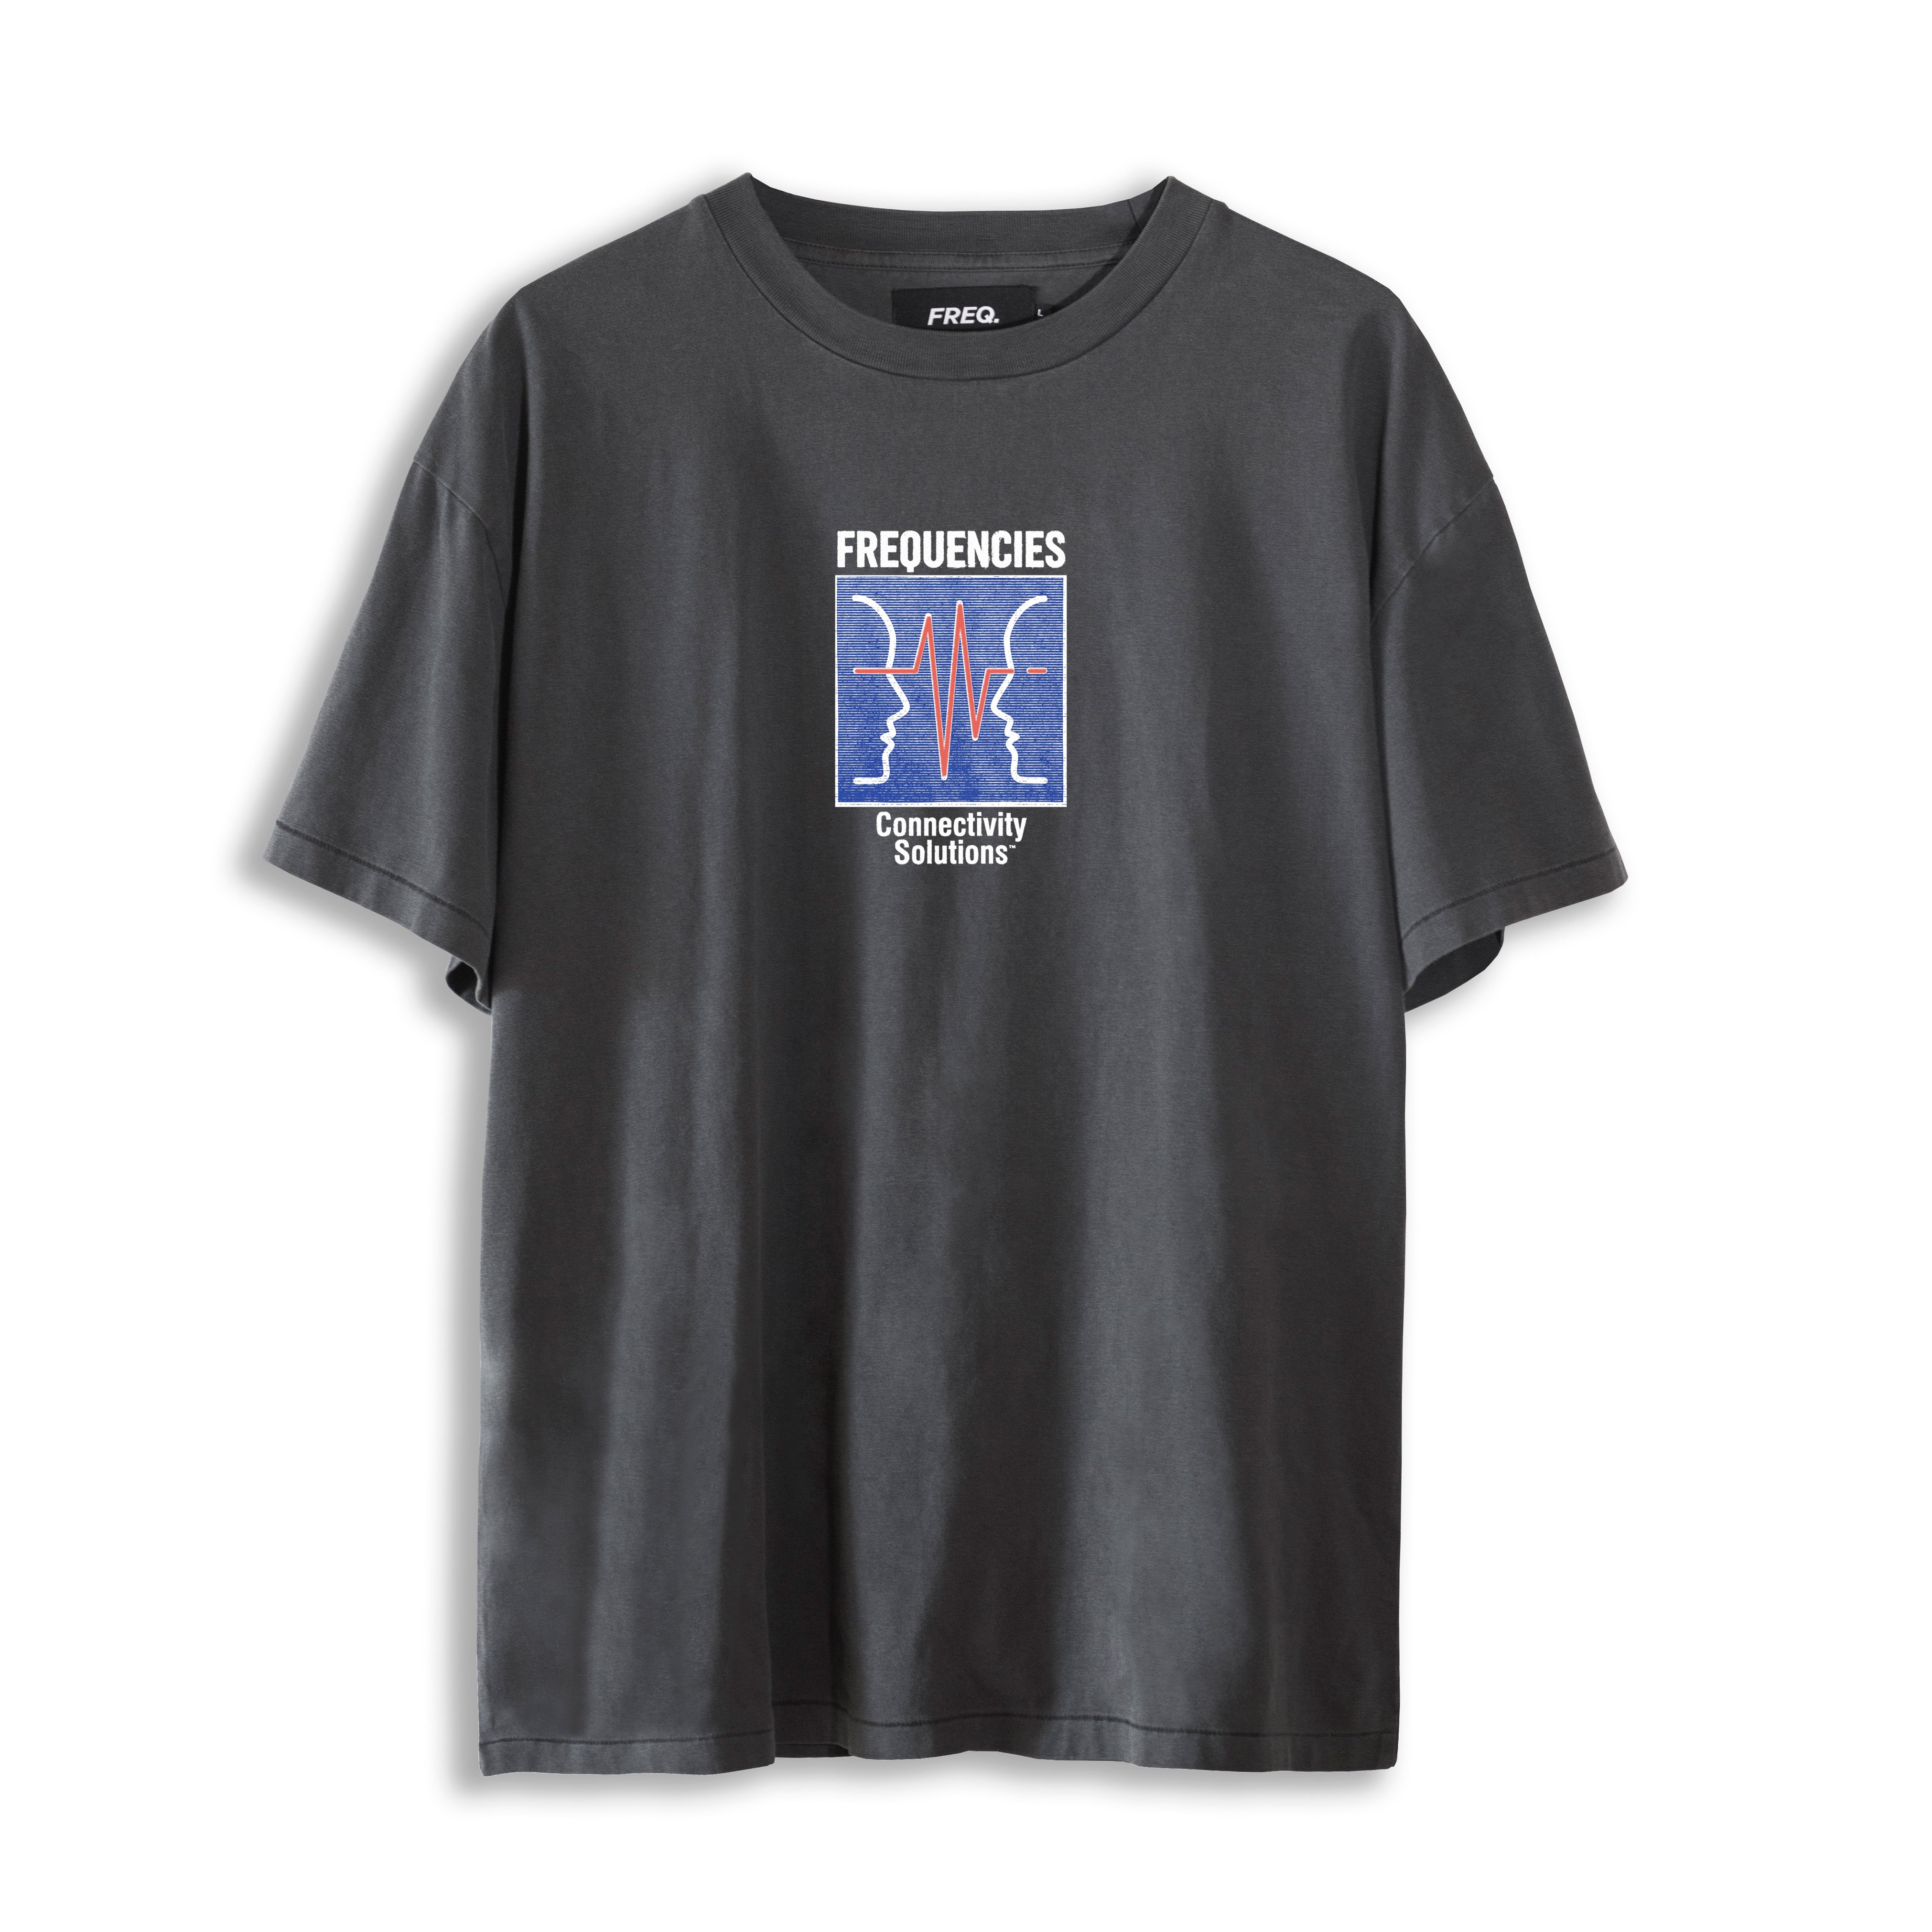 CONNECTIVITY SOLUTIONS TEE - STATIC BLACK